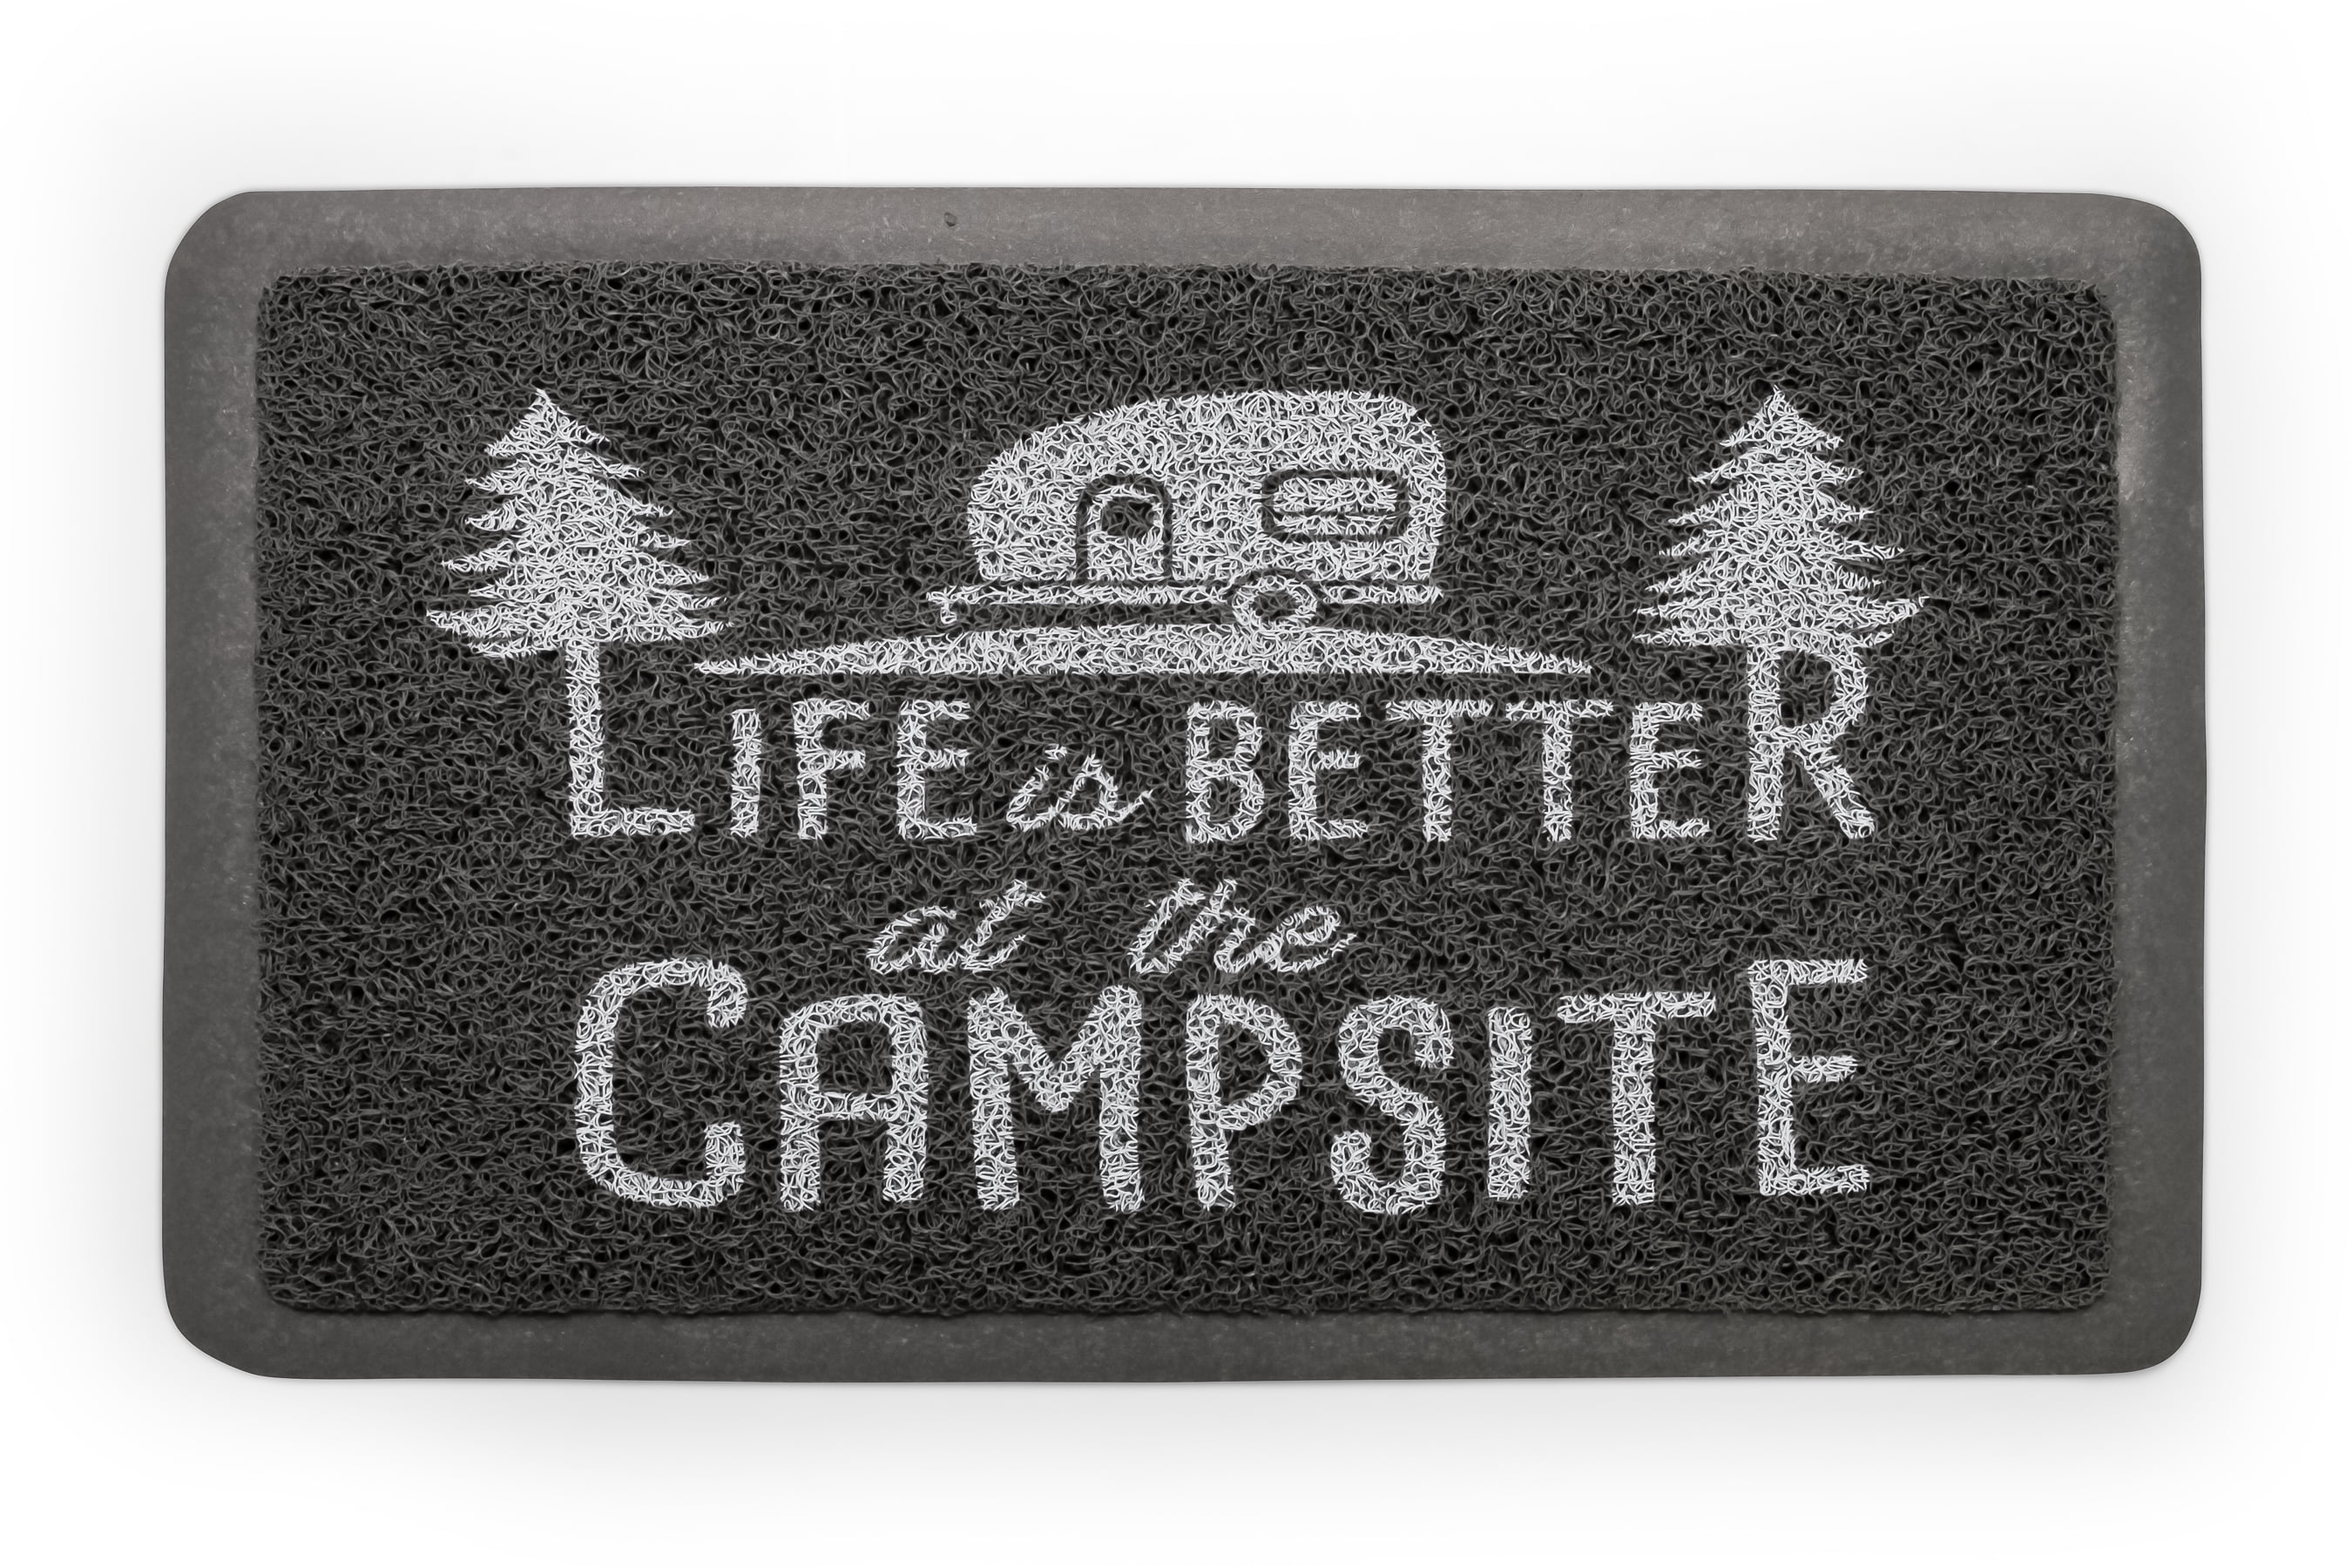 53199 Helps Trap Unwanted Debris from Tracking Into Your RV Teal/White Color Home Camco Life is Better at The Campsite Small Scrub Rug or Campsite 